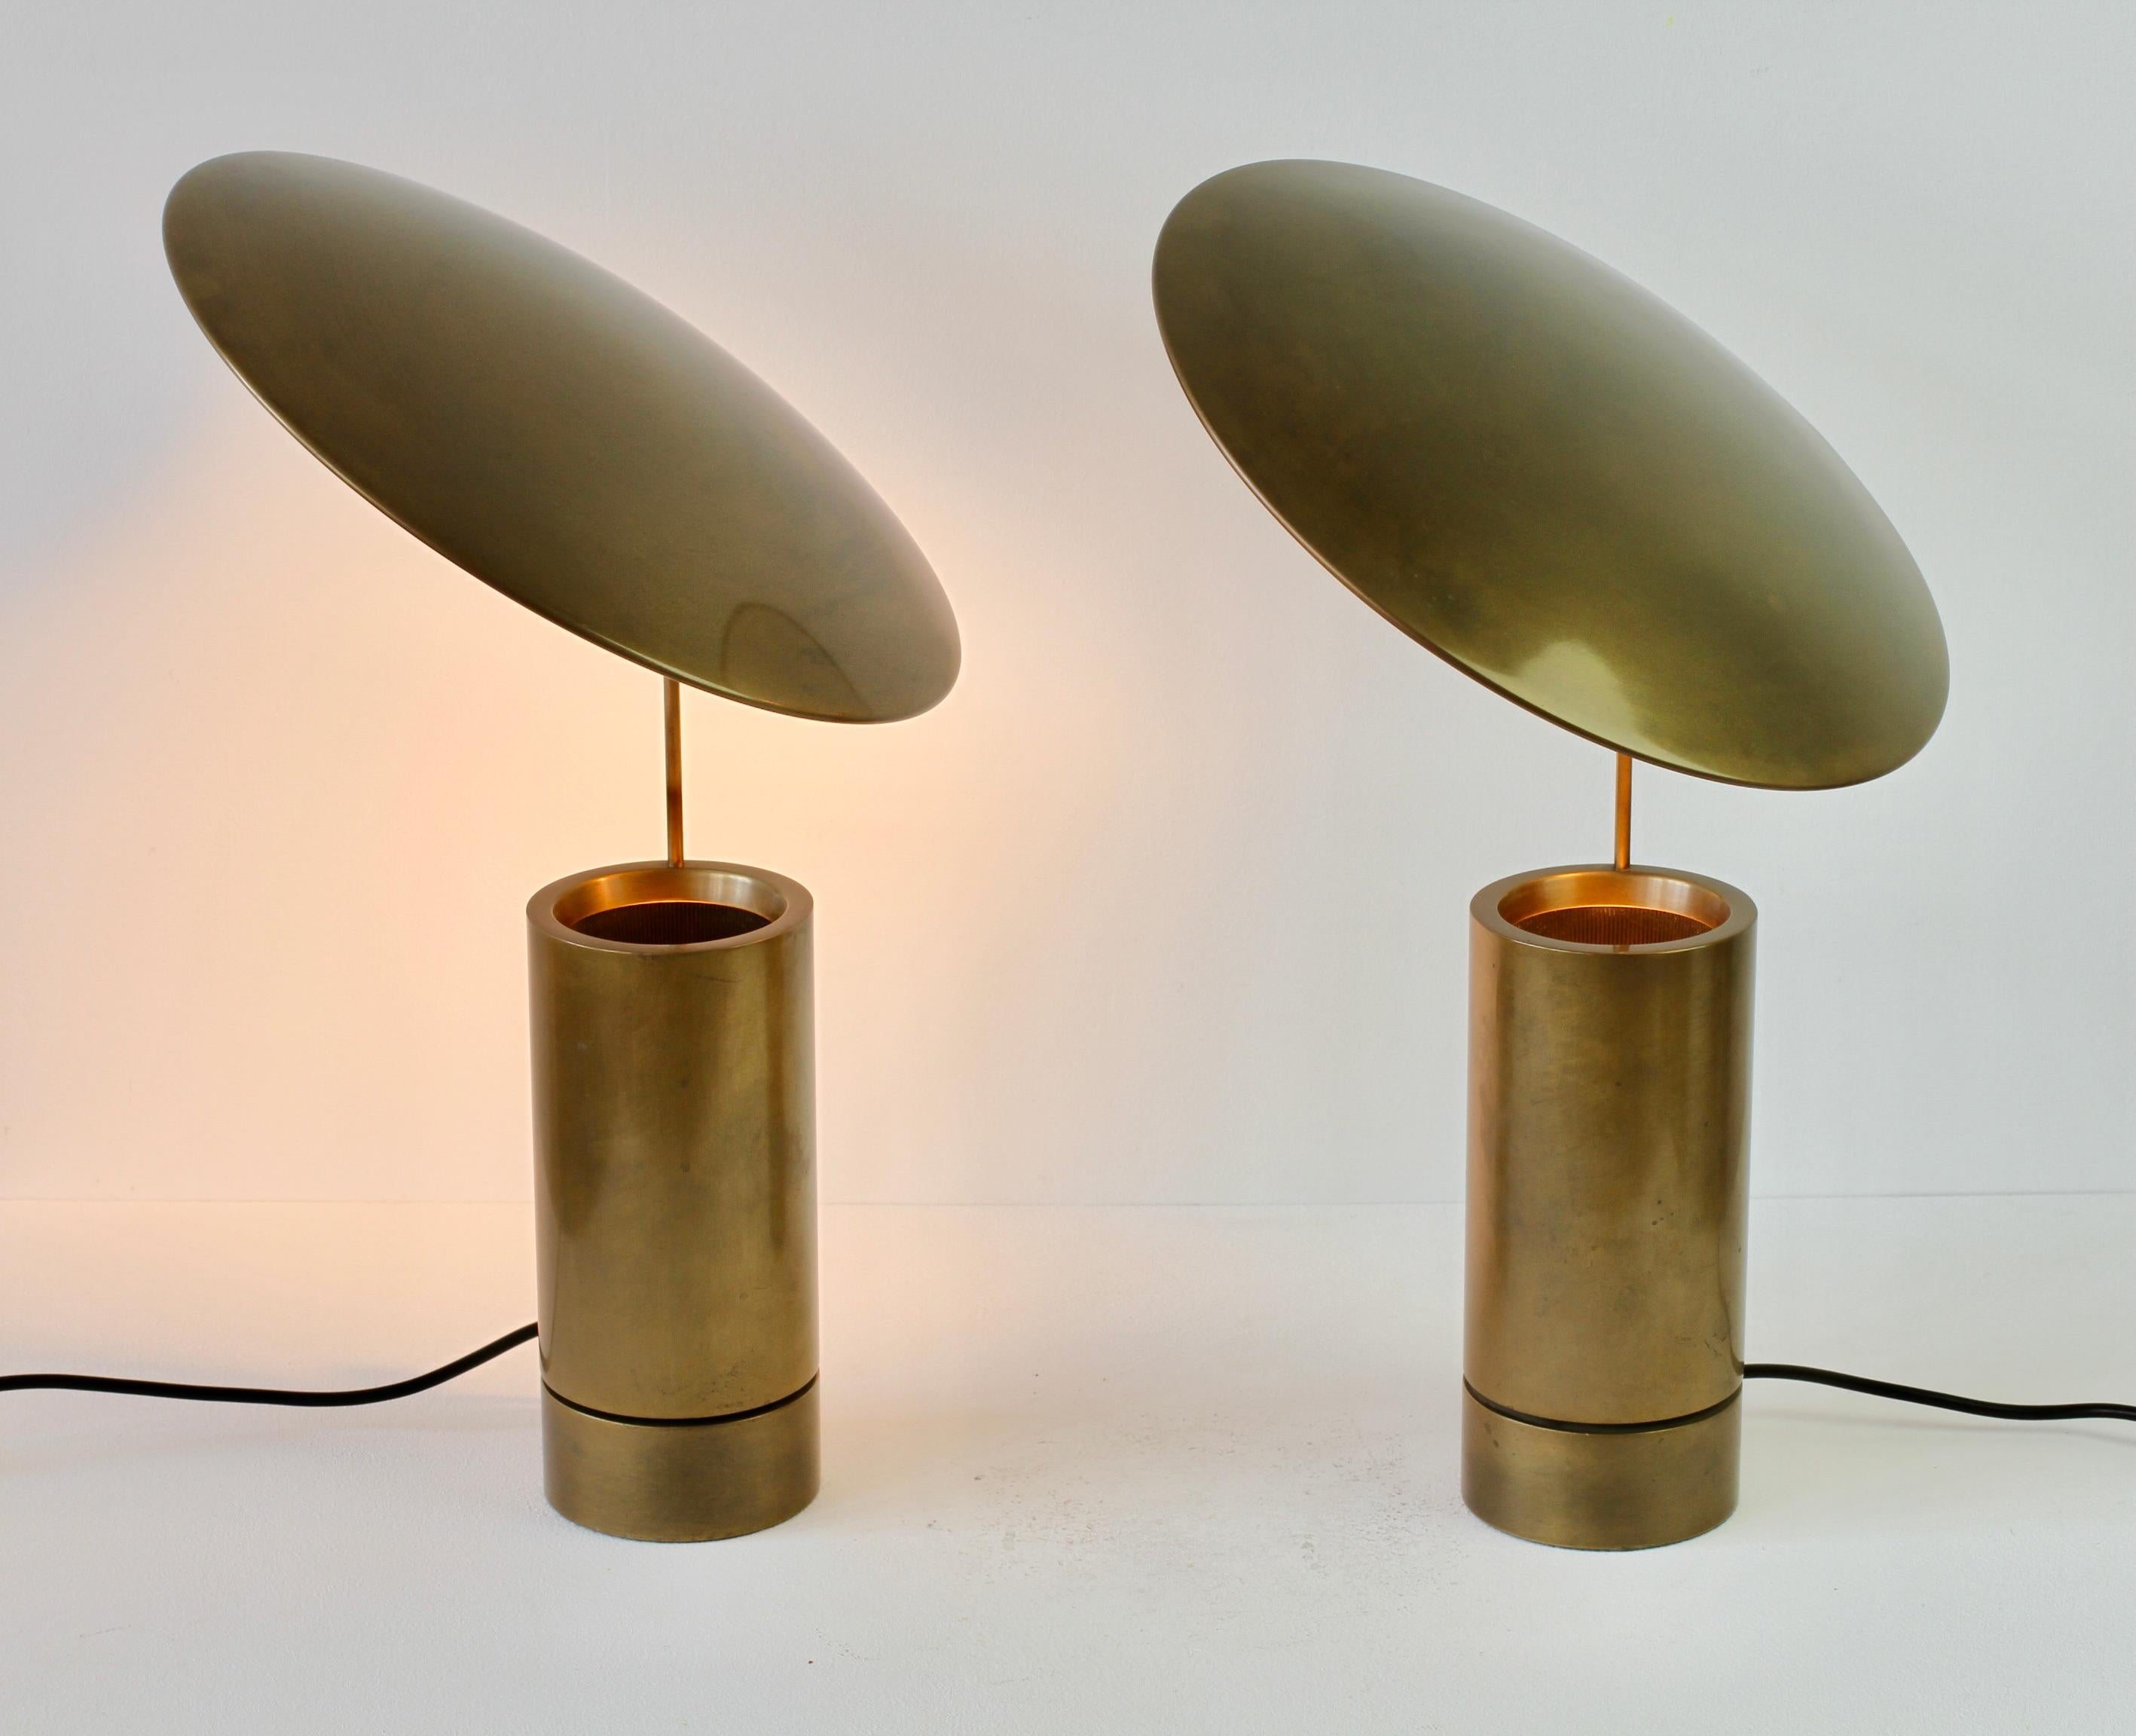 Florian Schulz Rare Pair or 'TOS' Vintage Modernist Brushed Brass Table Lamps 1